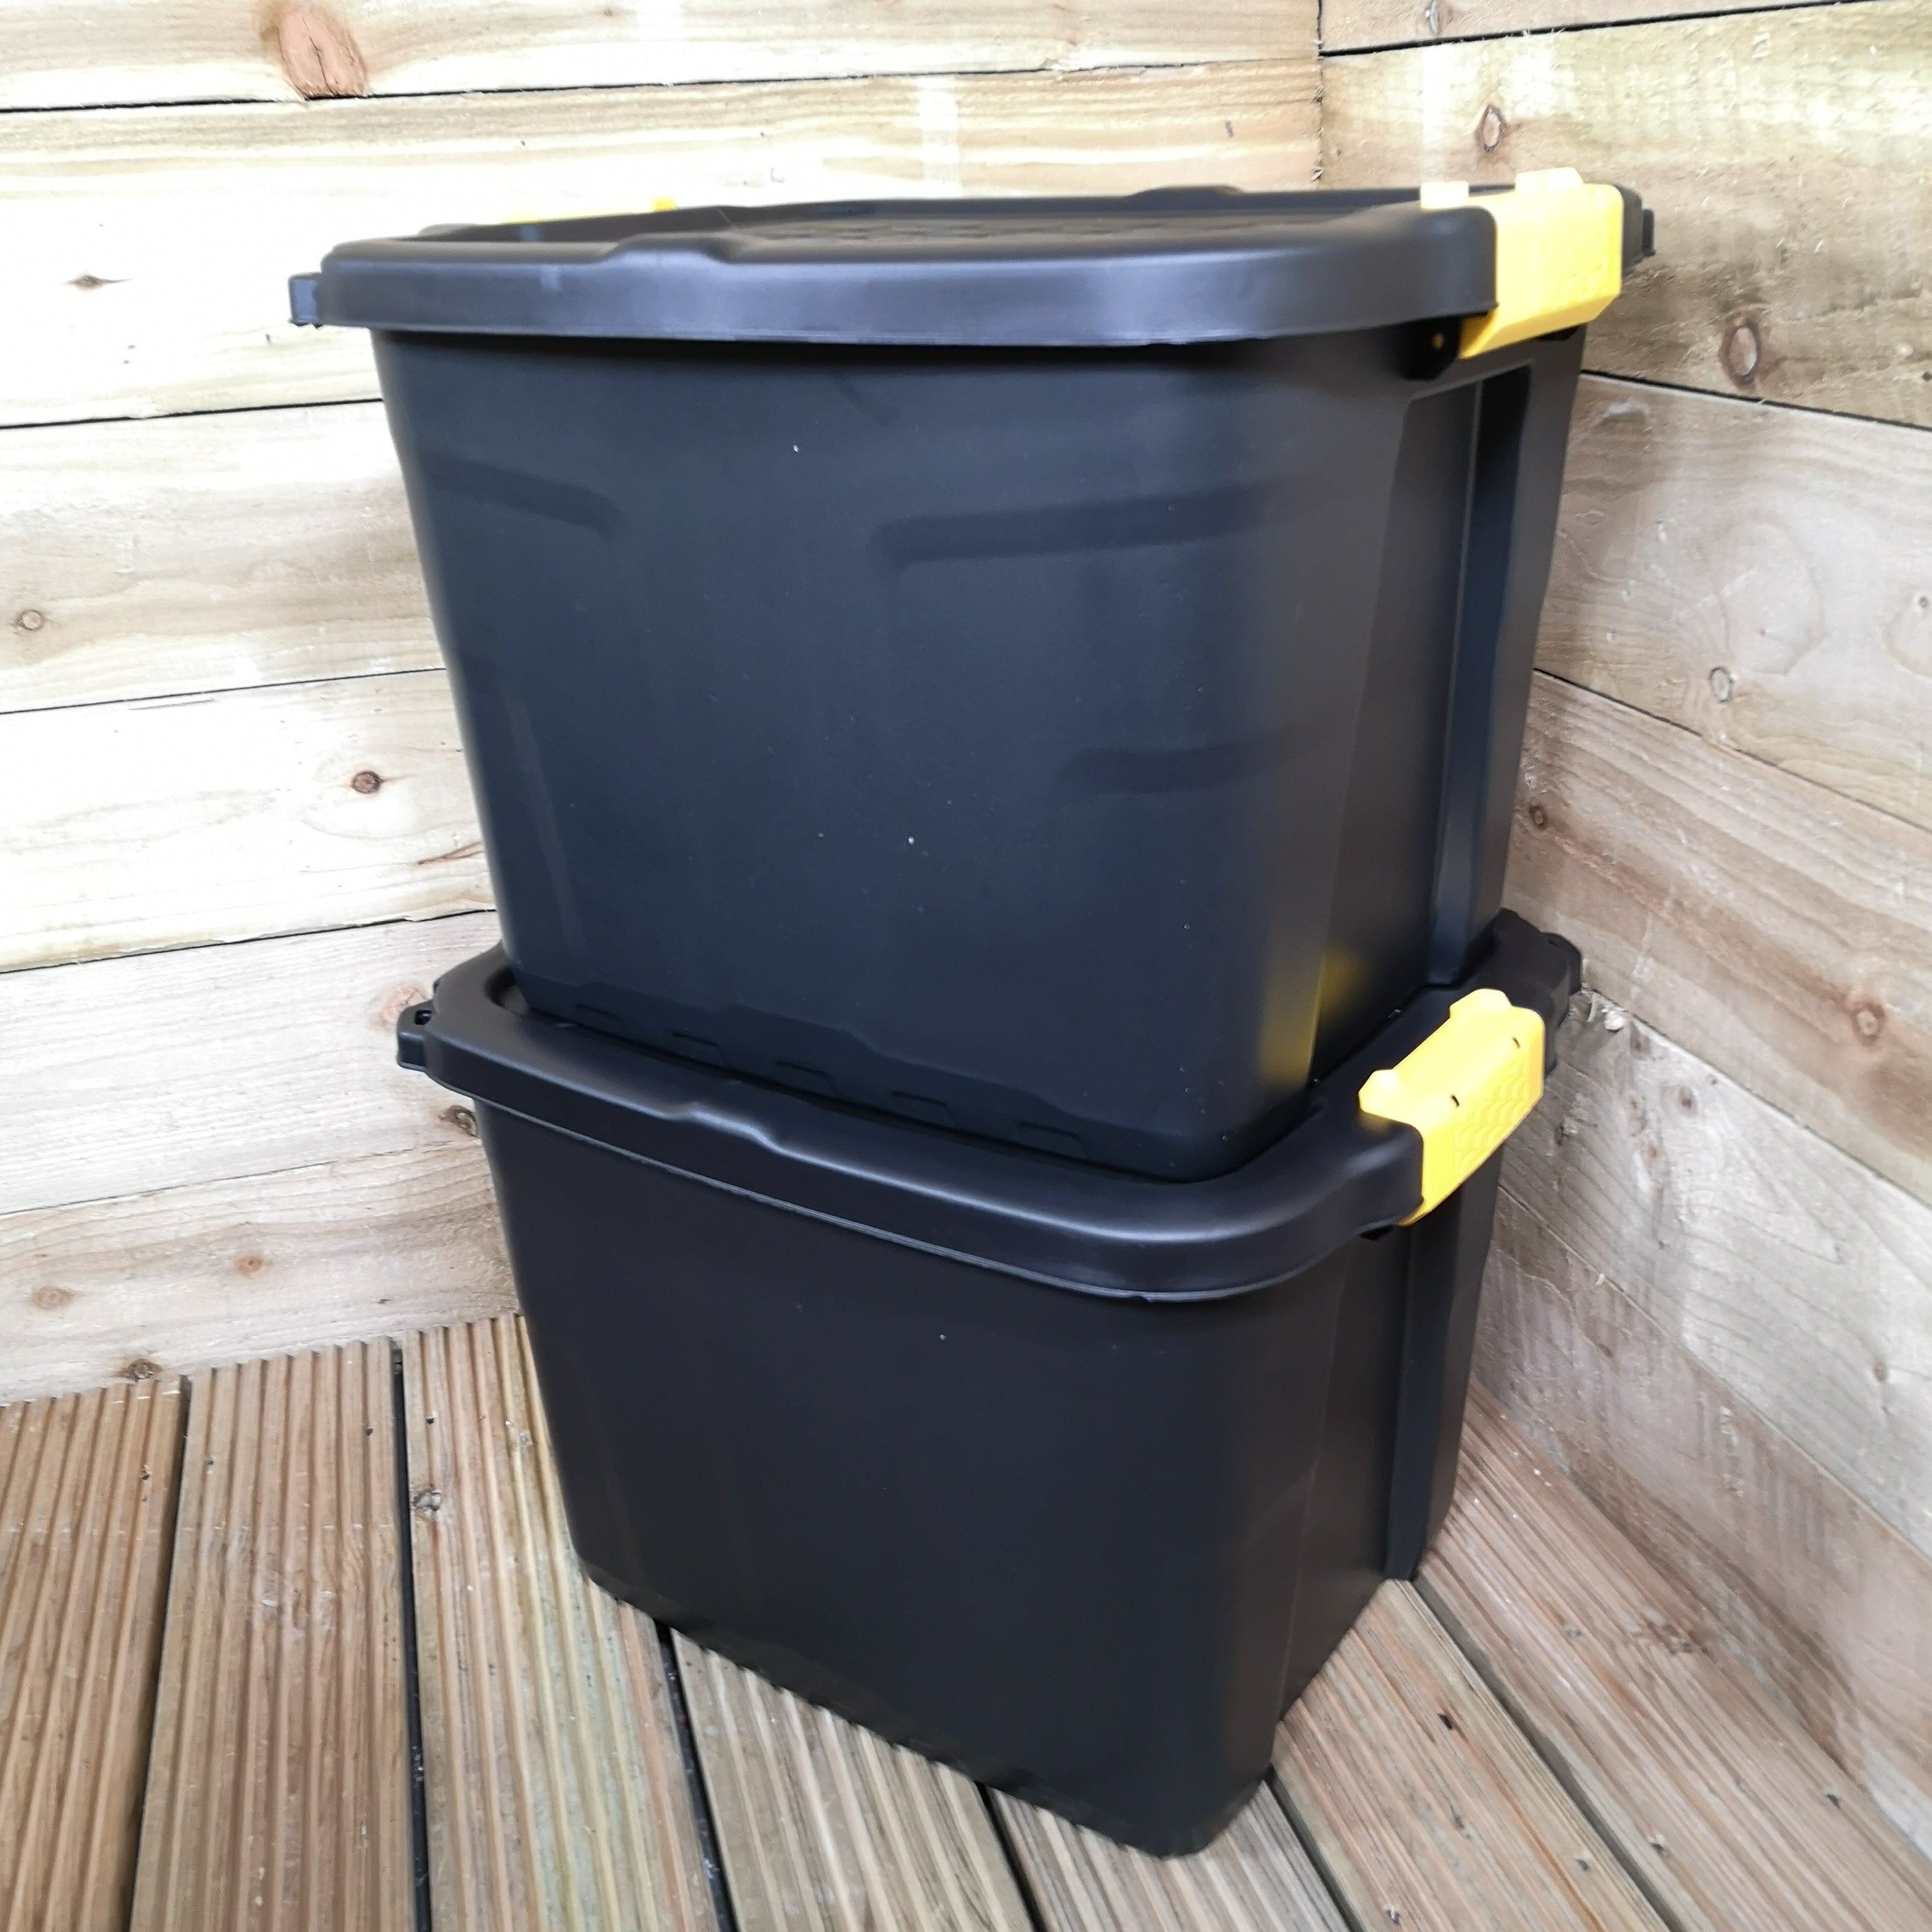 2 x 42L Heavy Duty Storage Tubs Sturdy, Lockable, Stackable and Nestable Design Storage Chests with Clips in Black